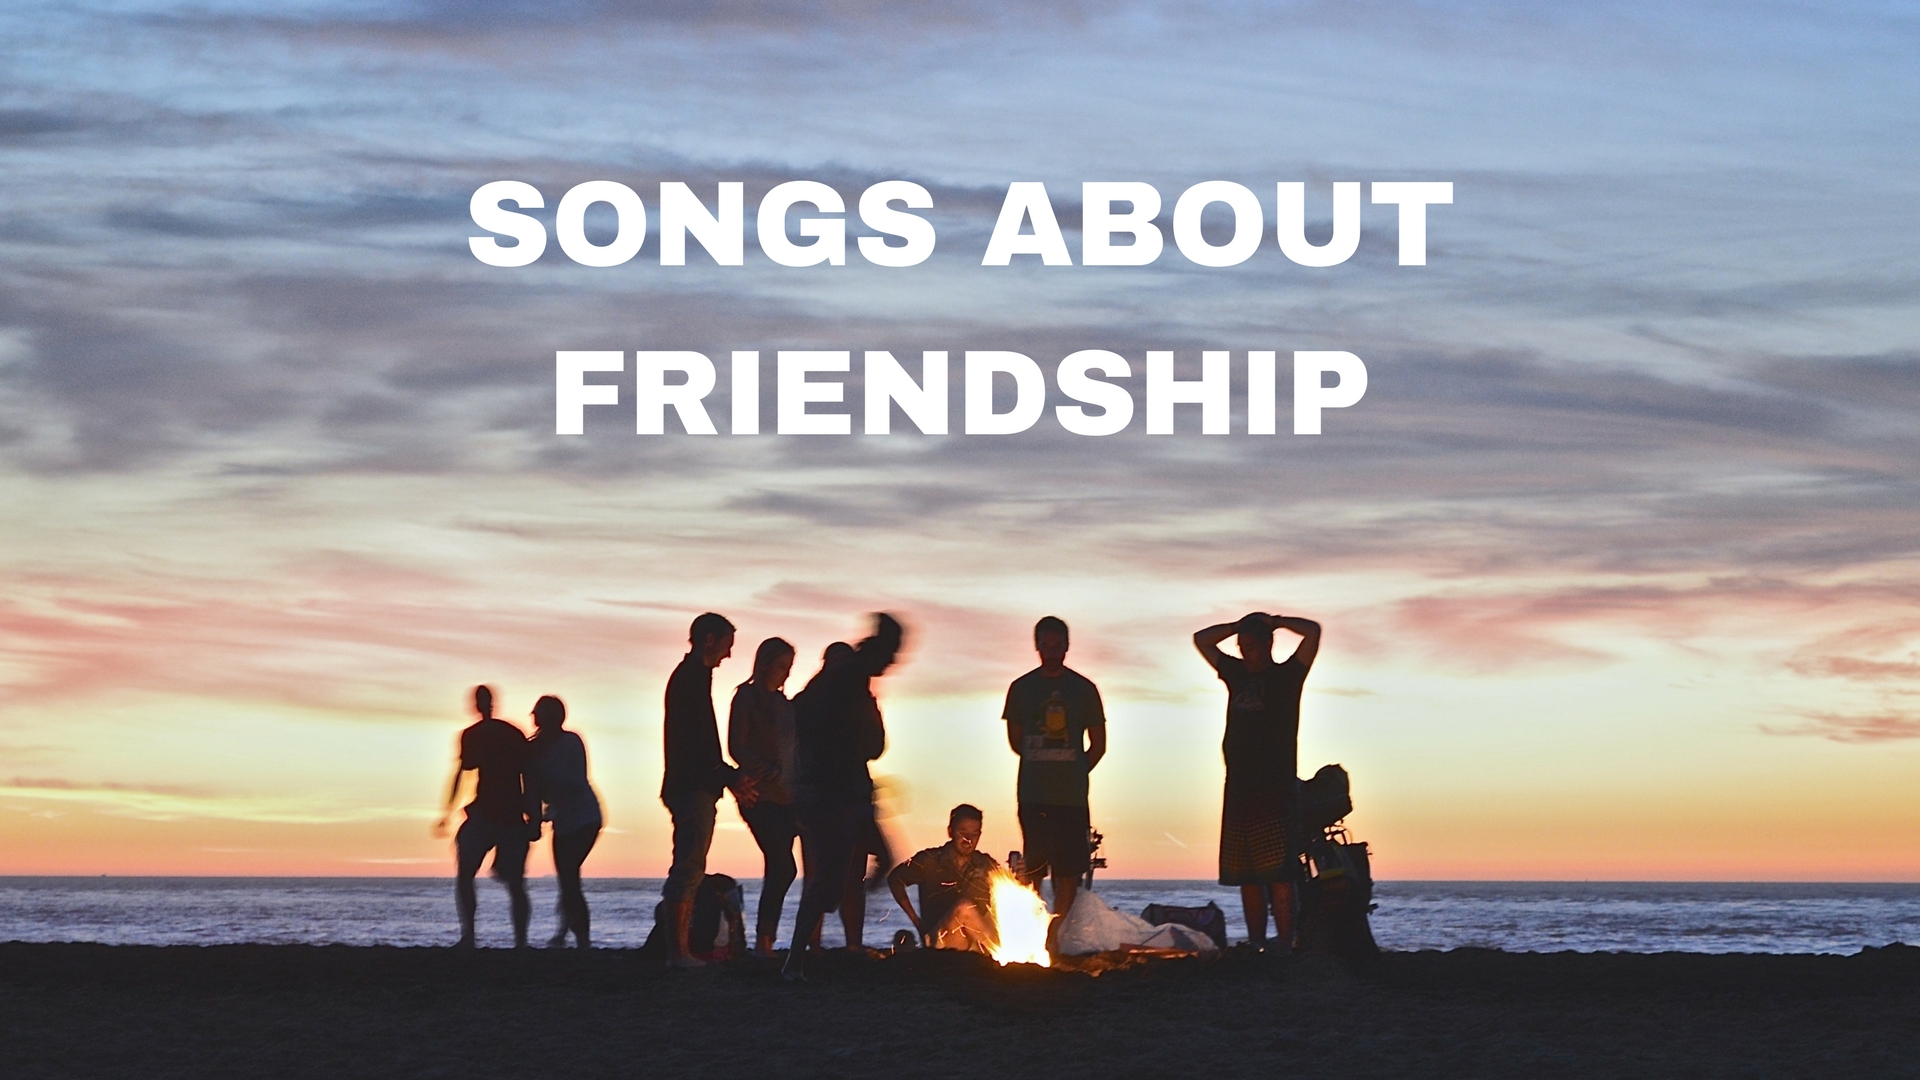 Songs About Friendship: 30 Songs About Good and Bad Friendships